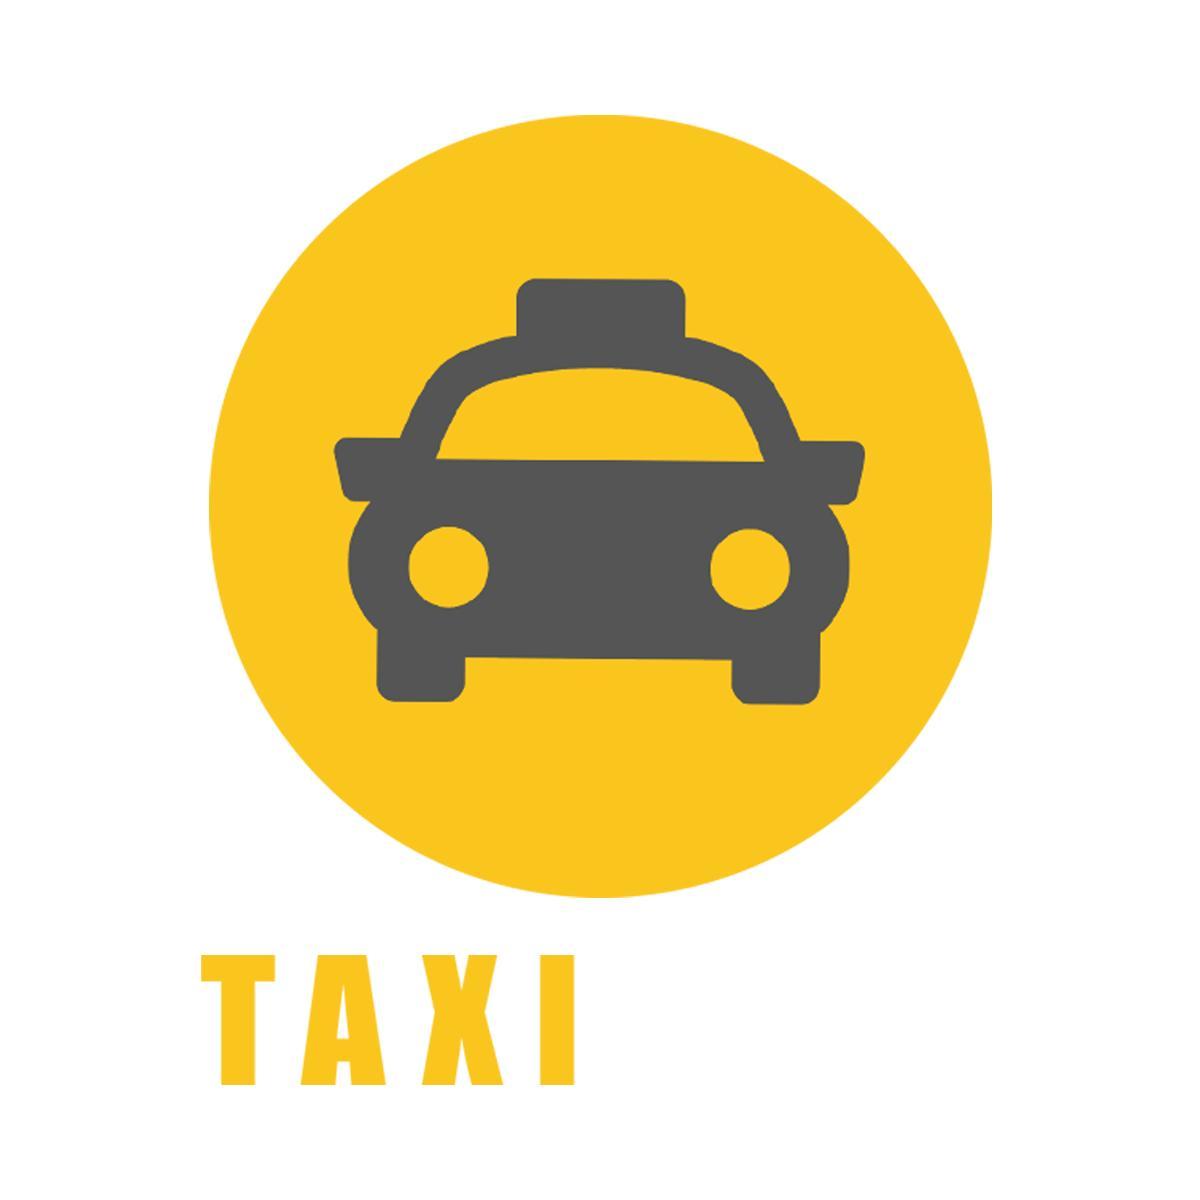 Taxi App Logo - Taxilink: Davao's Homegrown Taxi App | Ketchup the Latest from Louise